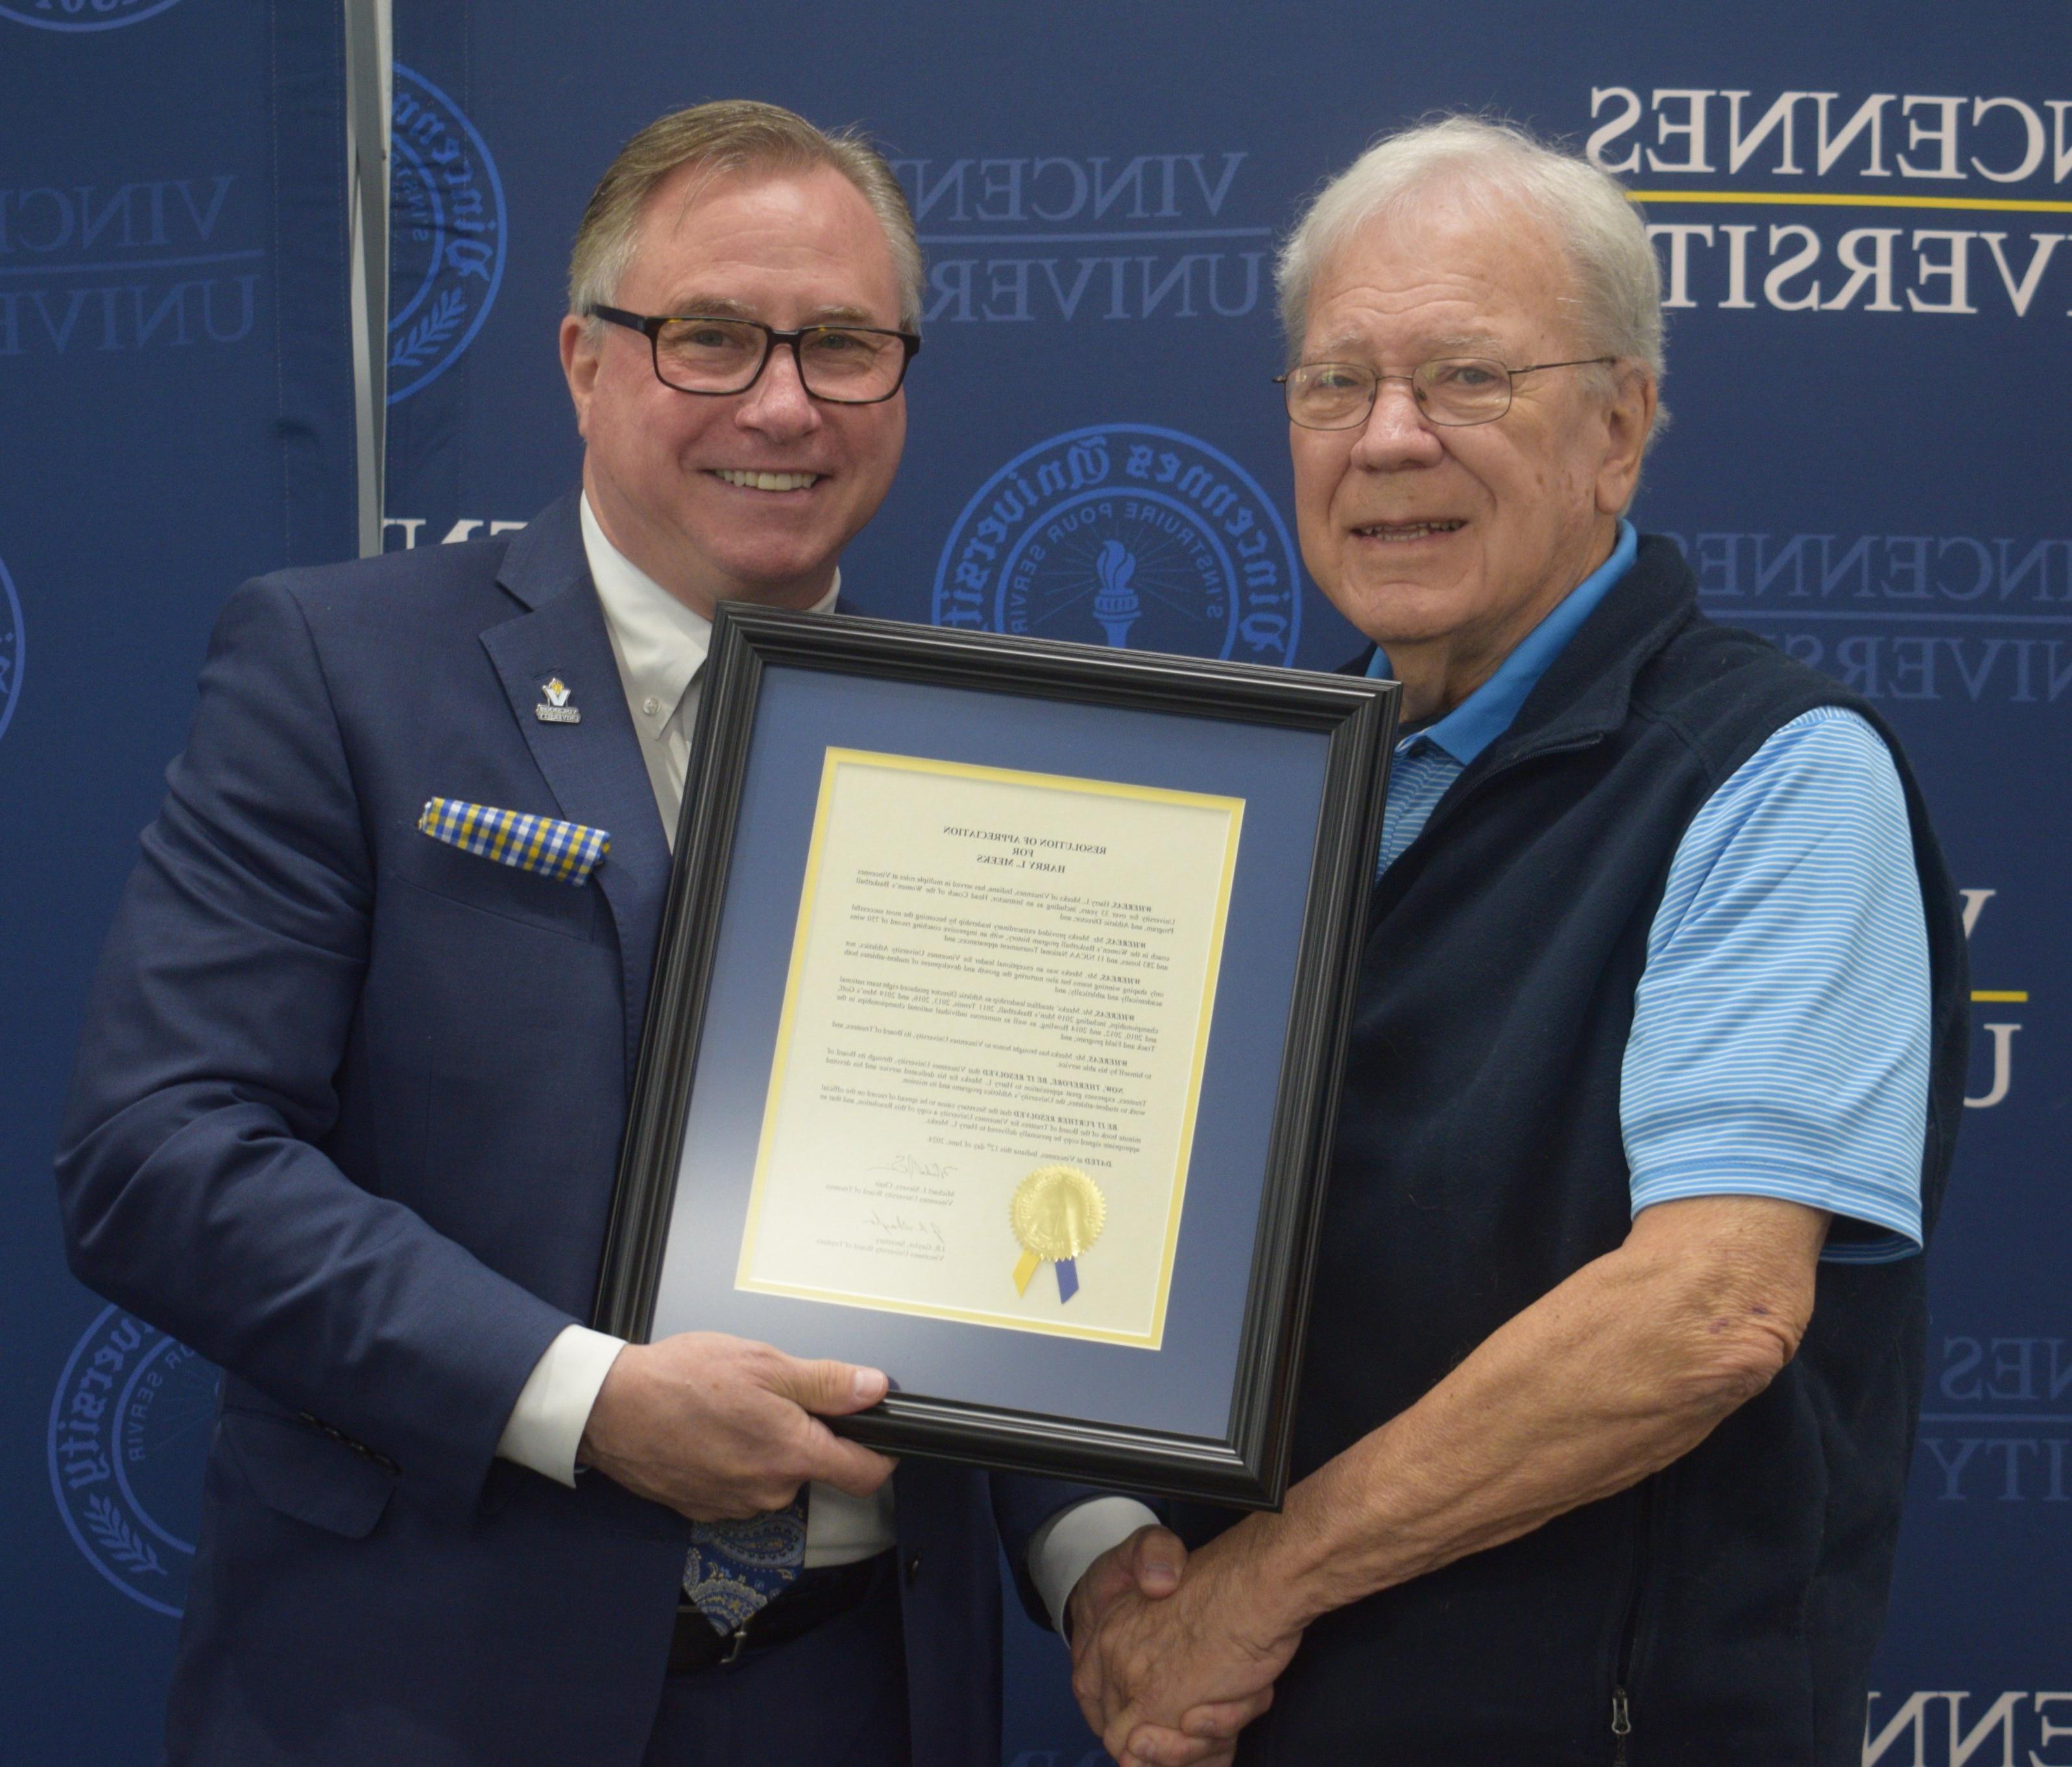 Harry Meeks (left) receives a Resolution of Appreciation from Dr. Chuck Johnson and the Board of Trustees.